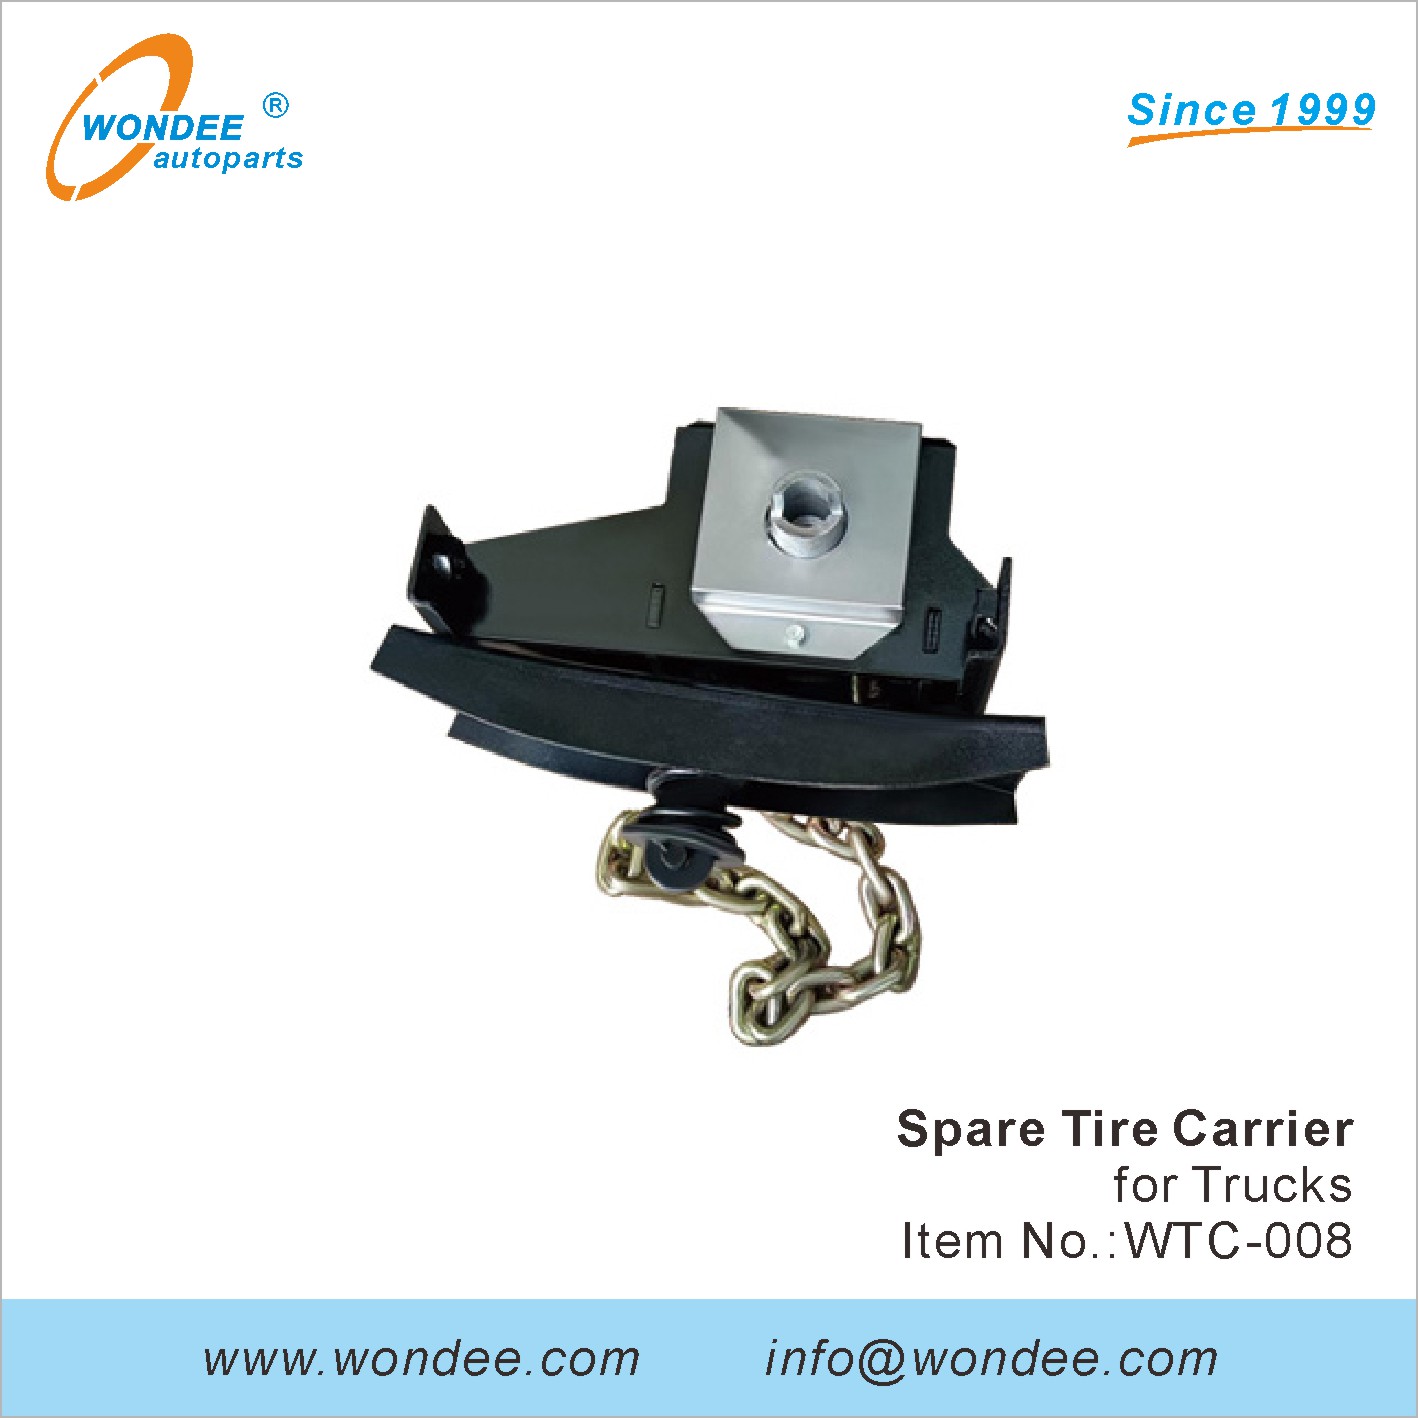 WONDEE spare tire carrier (8)